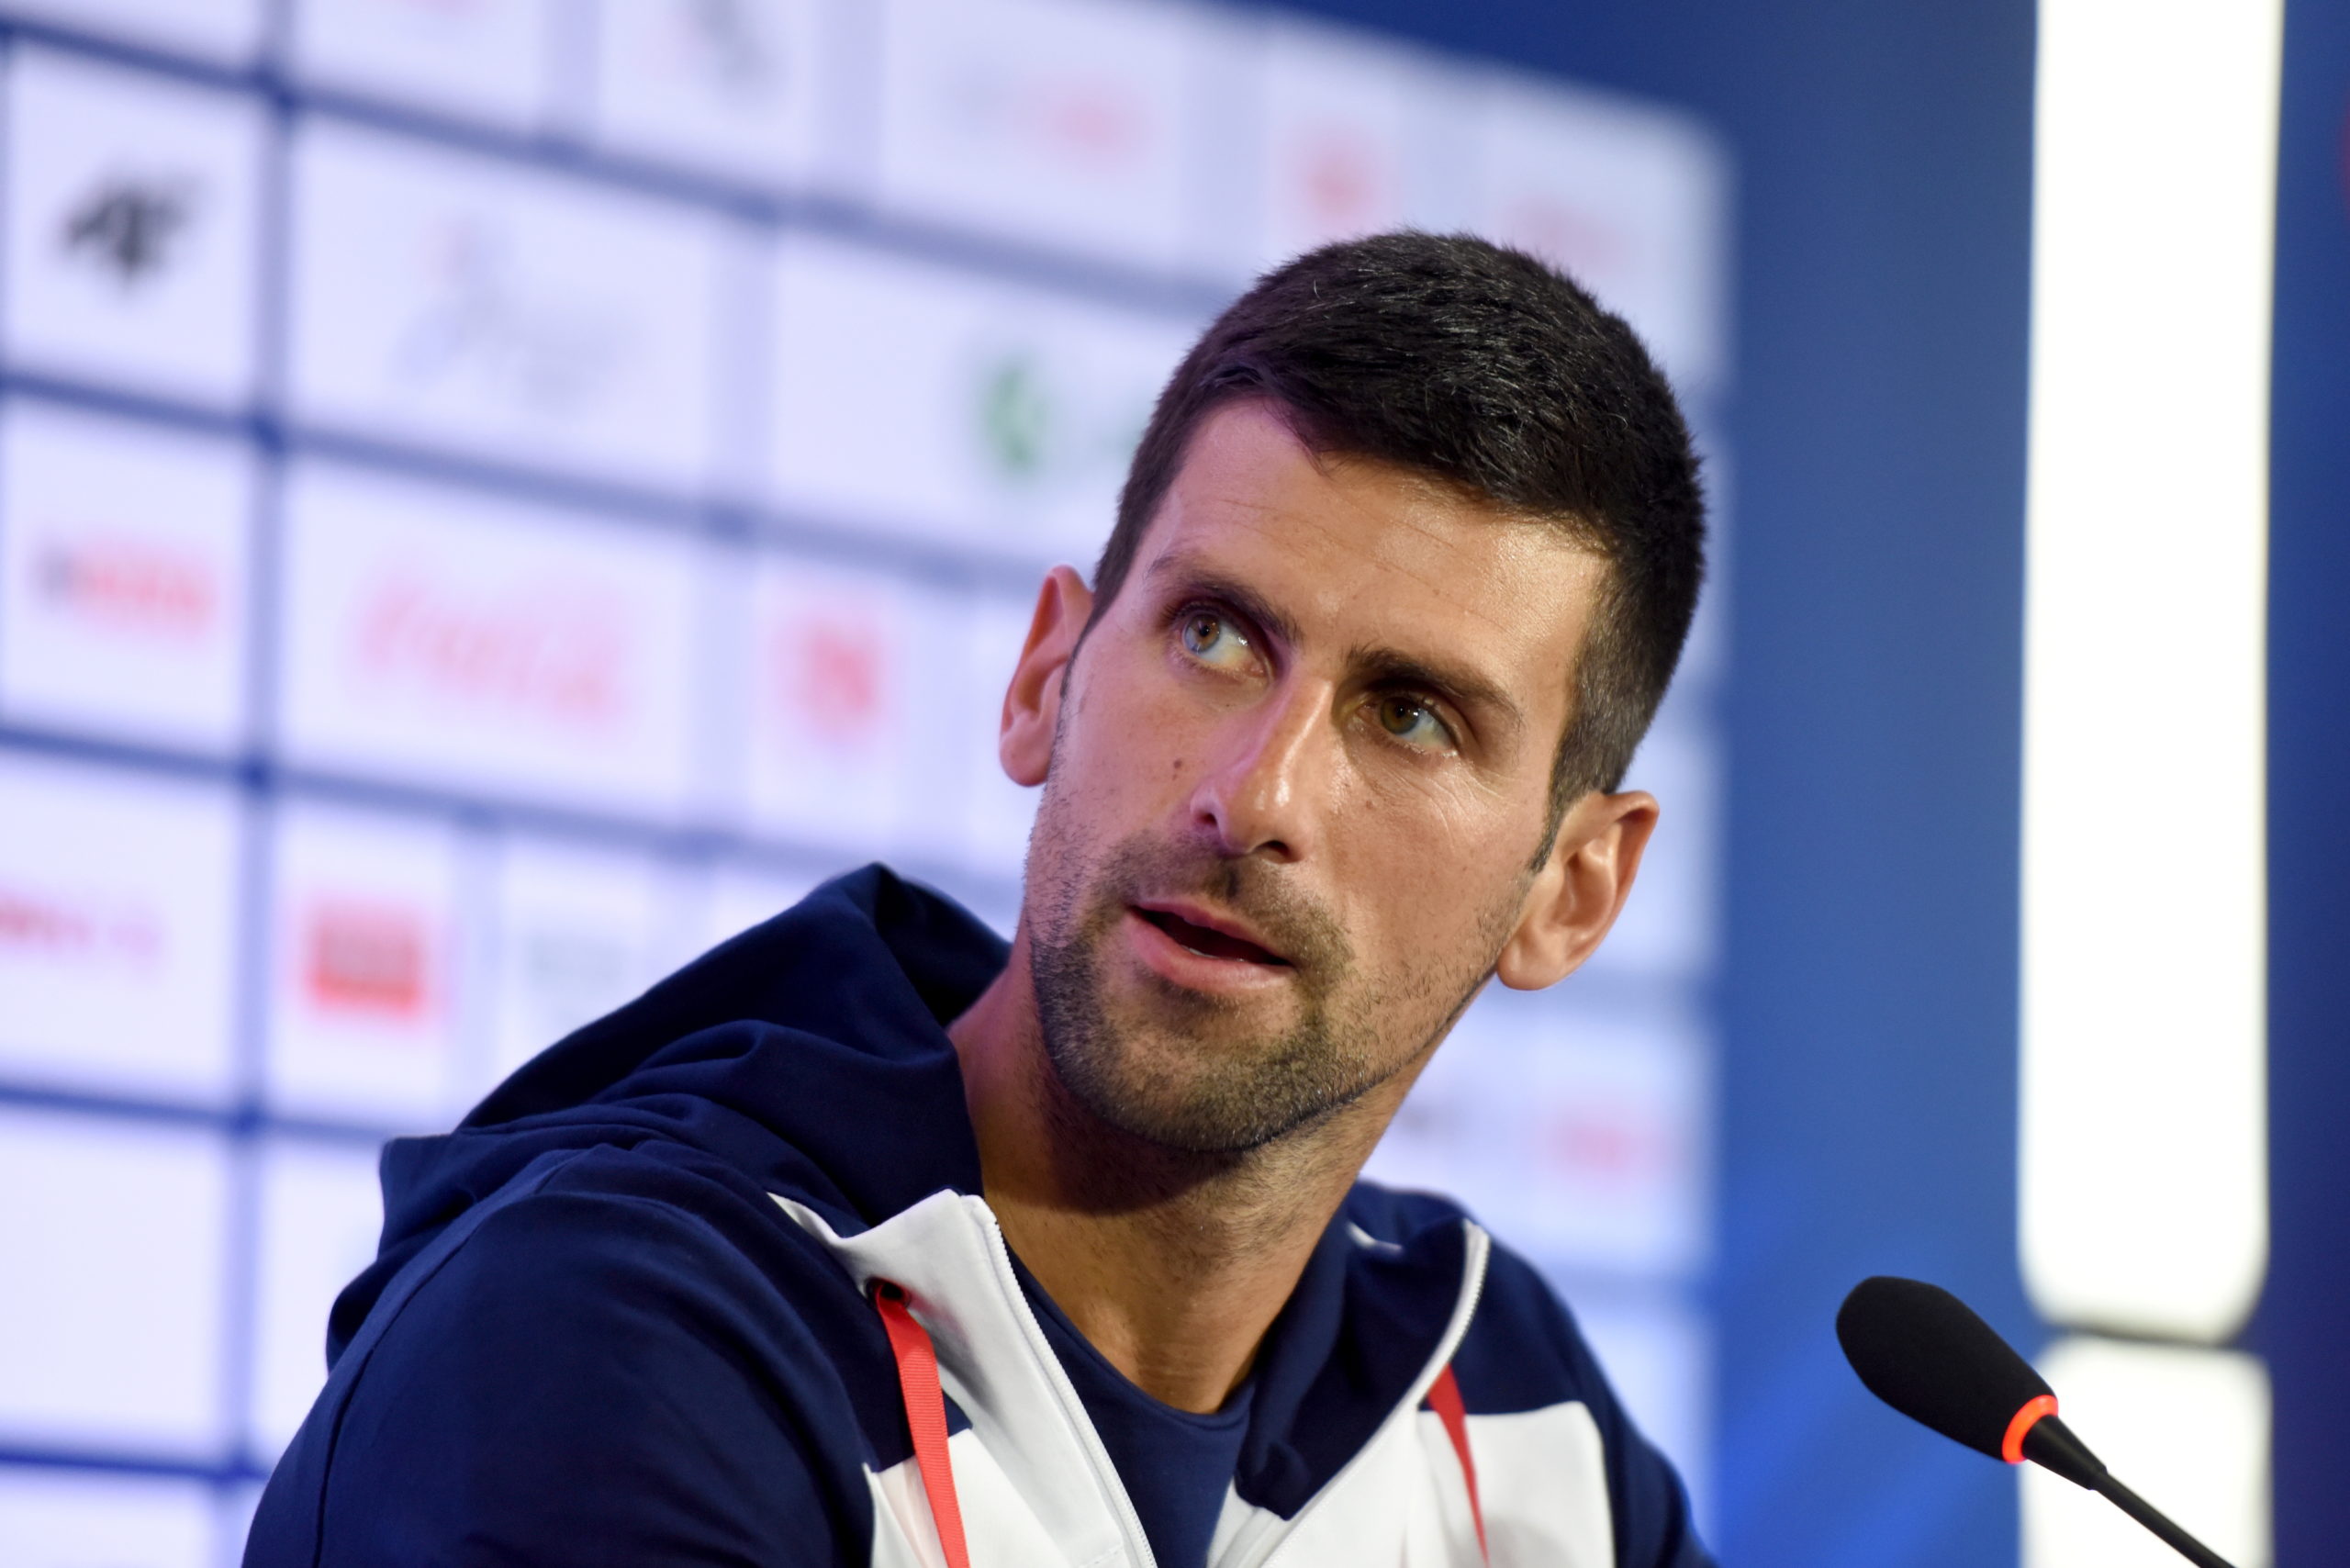 Tennis player Novak Djokovic speaks to the media before traveling to Japan where he will represent Serbia at the Tokyo 2020 Olympics, in Belgrade, Serbia, July 20, 2021. REUTERS/Zorana Jevtic